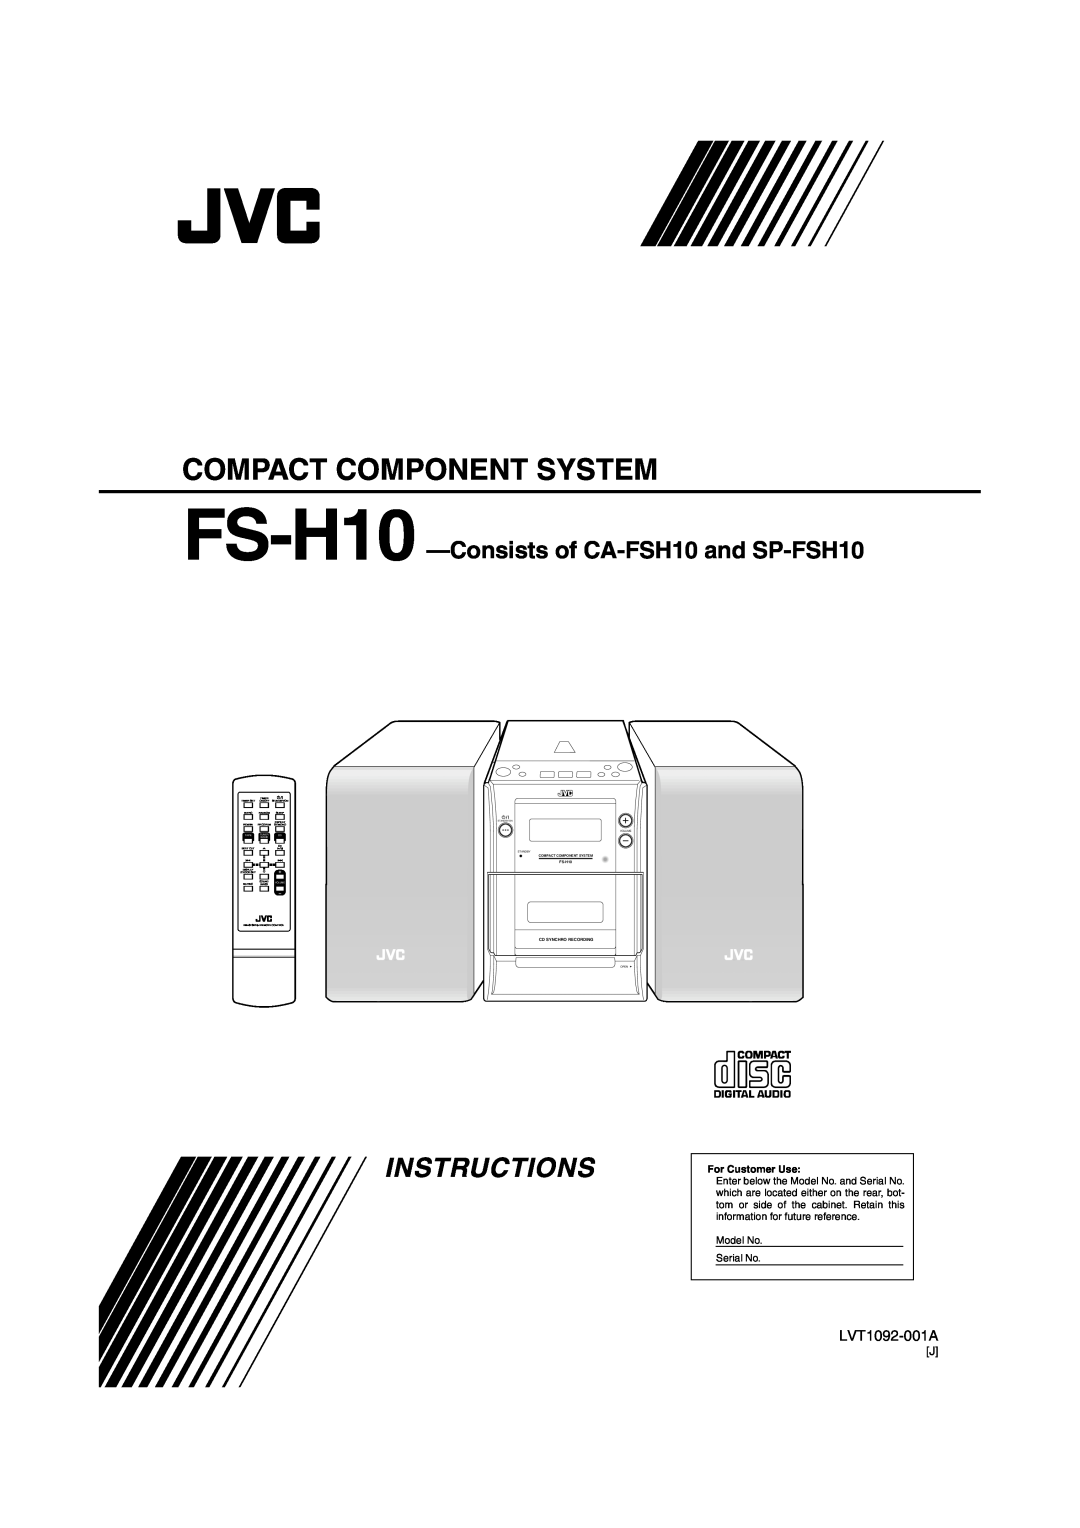 JVC manual Compact Component System, Instructions, FS-H10 -Consistsof CA-FSH10and SP-FSH10, LVT1092-001A, Open 